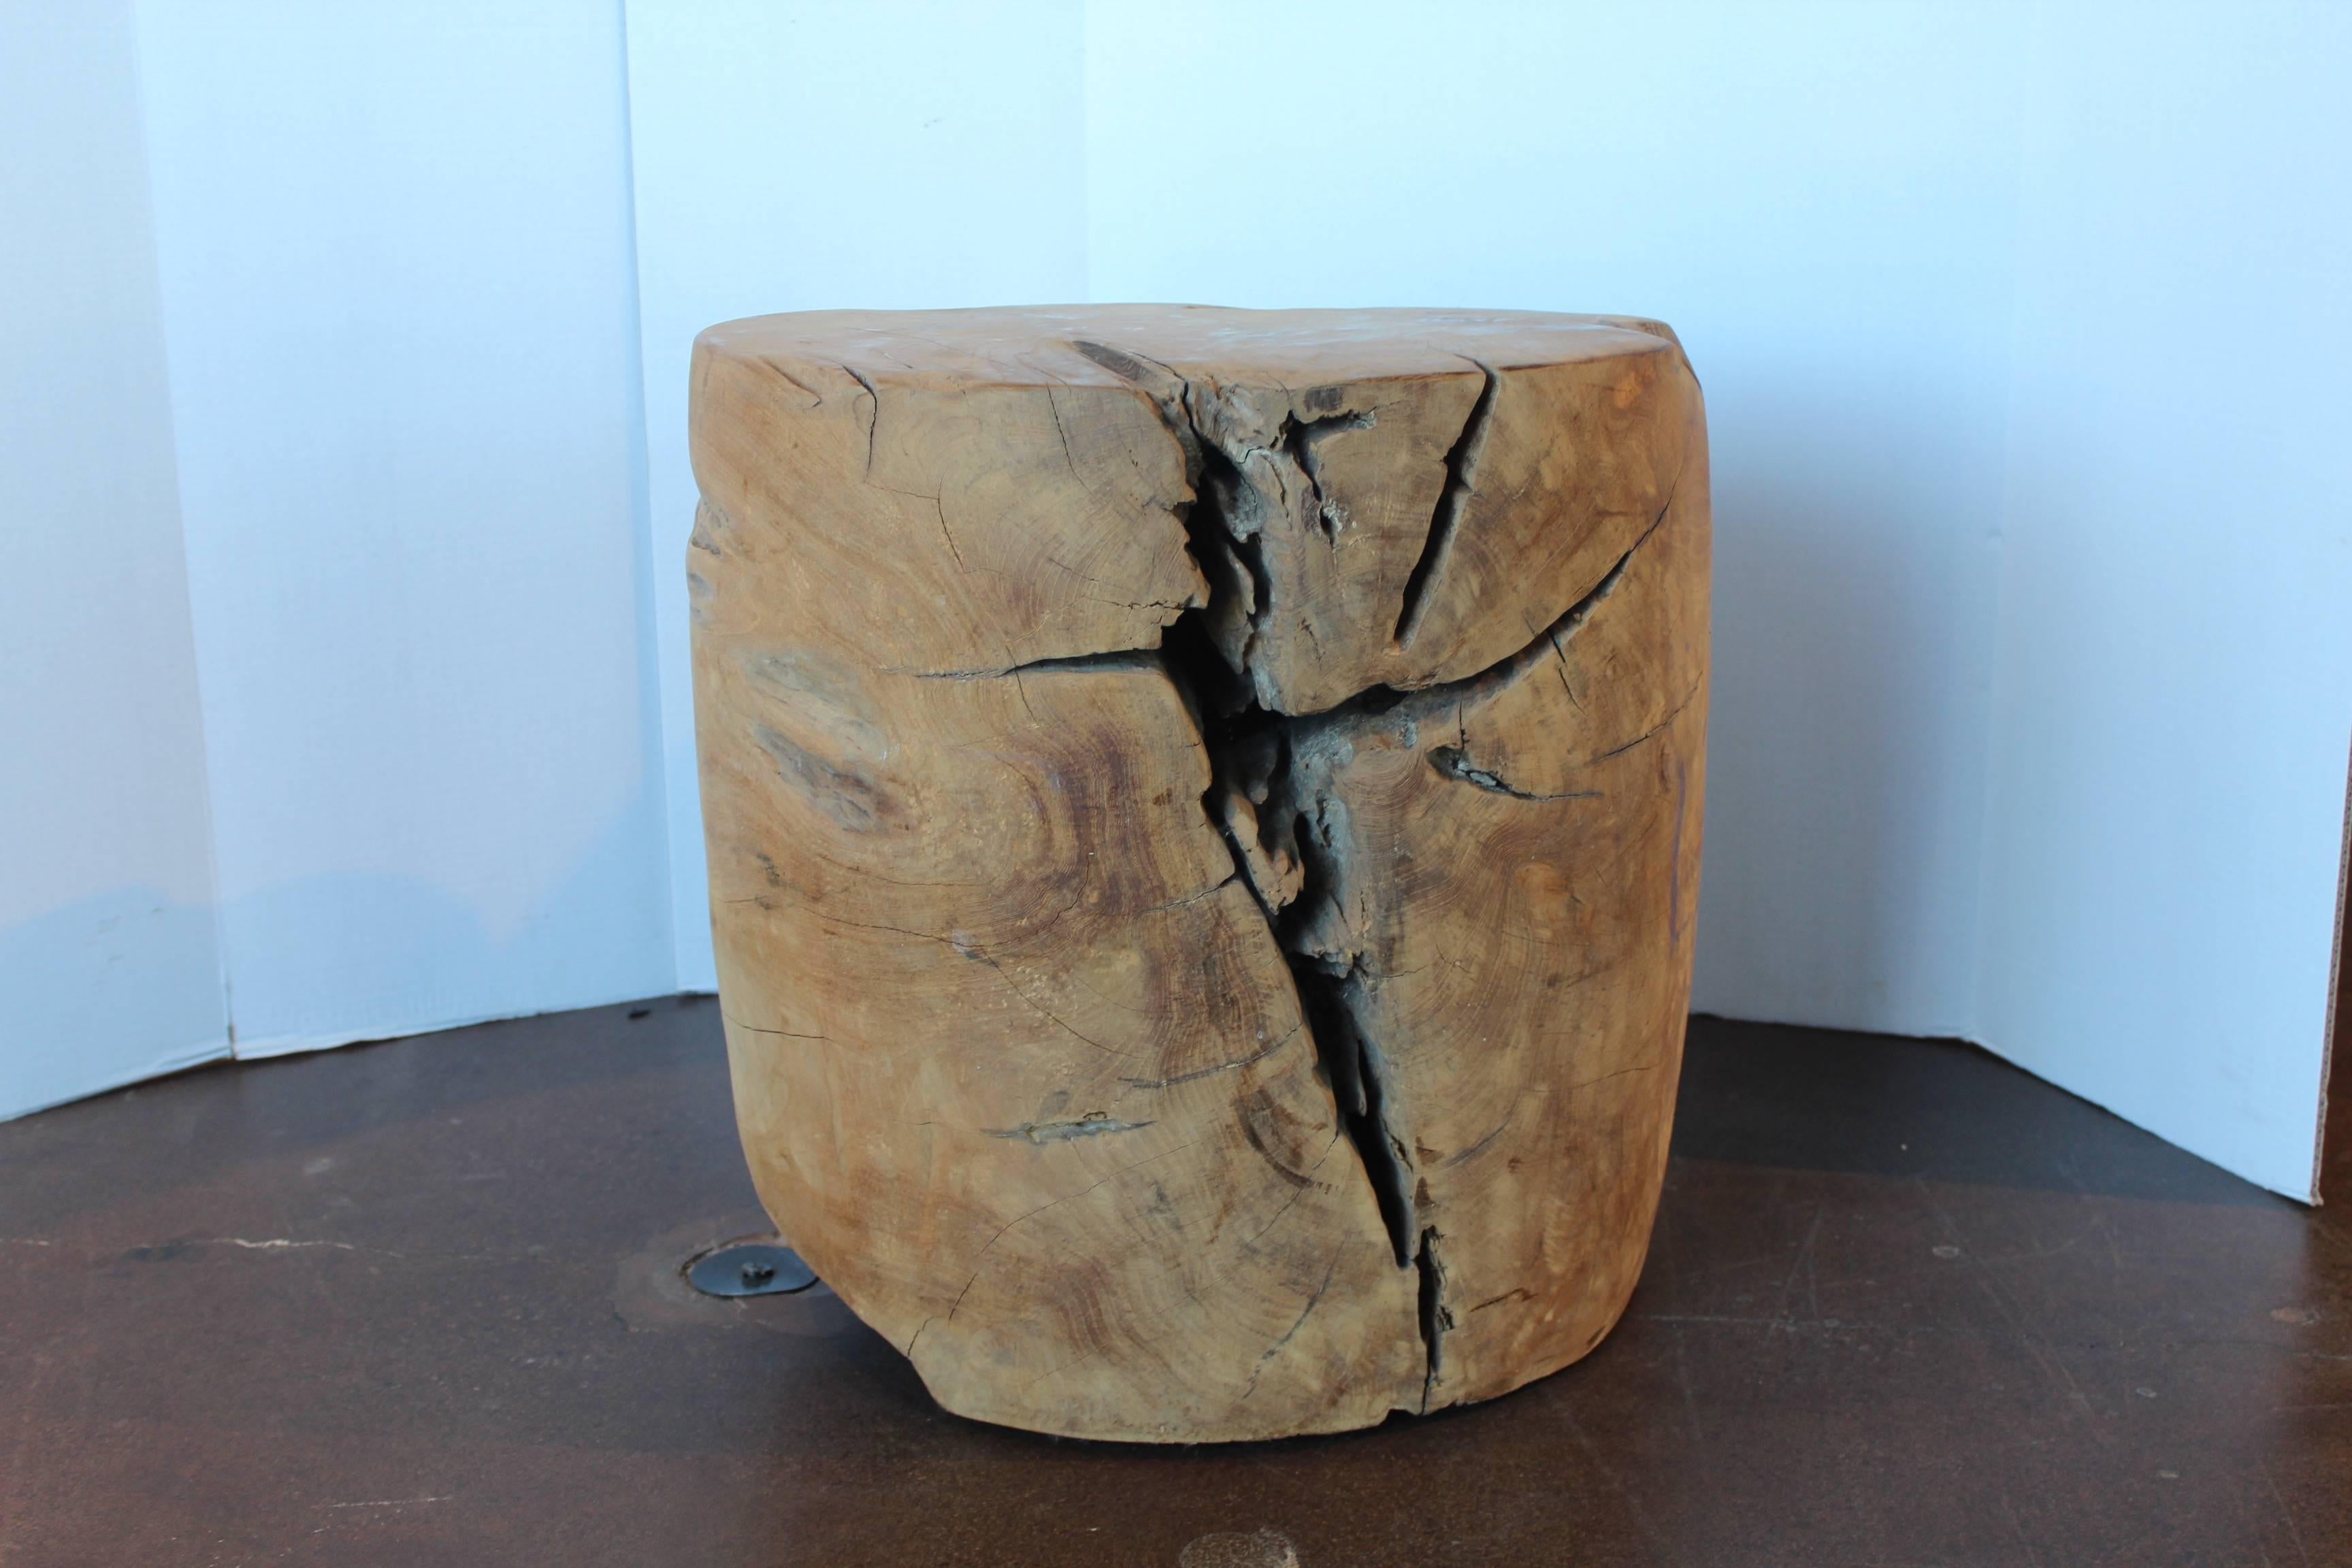 Solid organic teak end table.

Organic block teak a single reclaimed aged teak root. 
A perfect combination of modern and organic, with natural cracks to make a distinct end table. 

Can be used indoor or outdoor. 
If used outdoor, exposed to